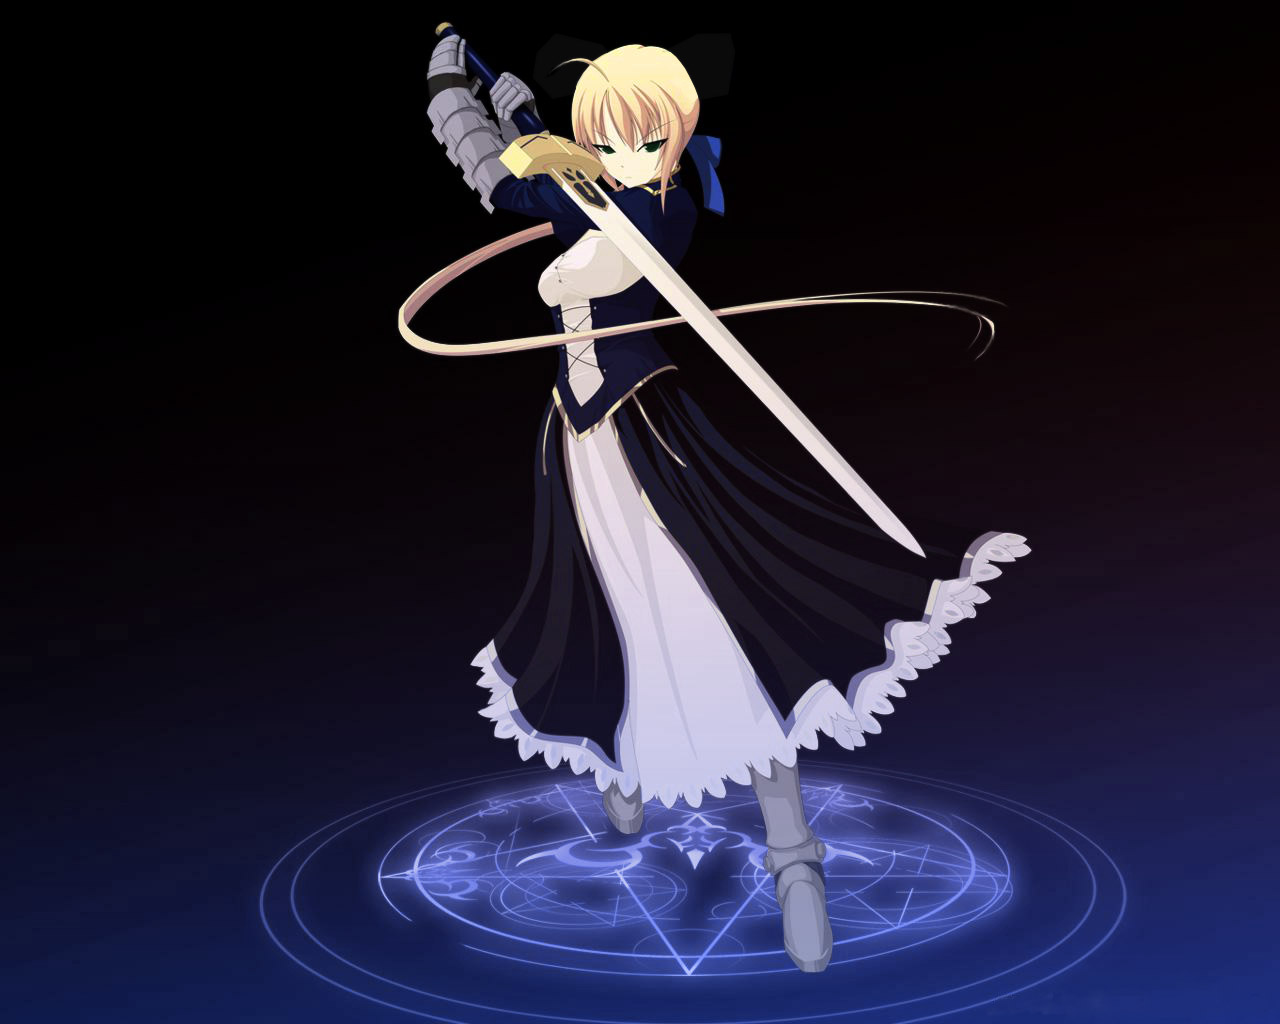 Saber   Fate Stay Night Wallpaper 24684502 1280x1024